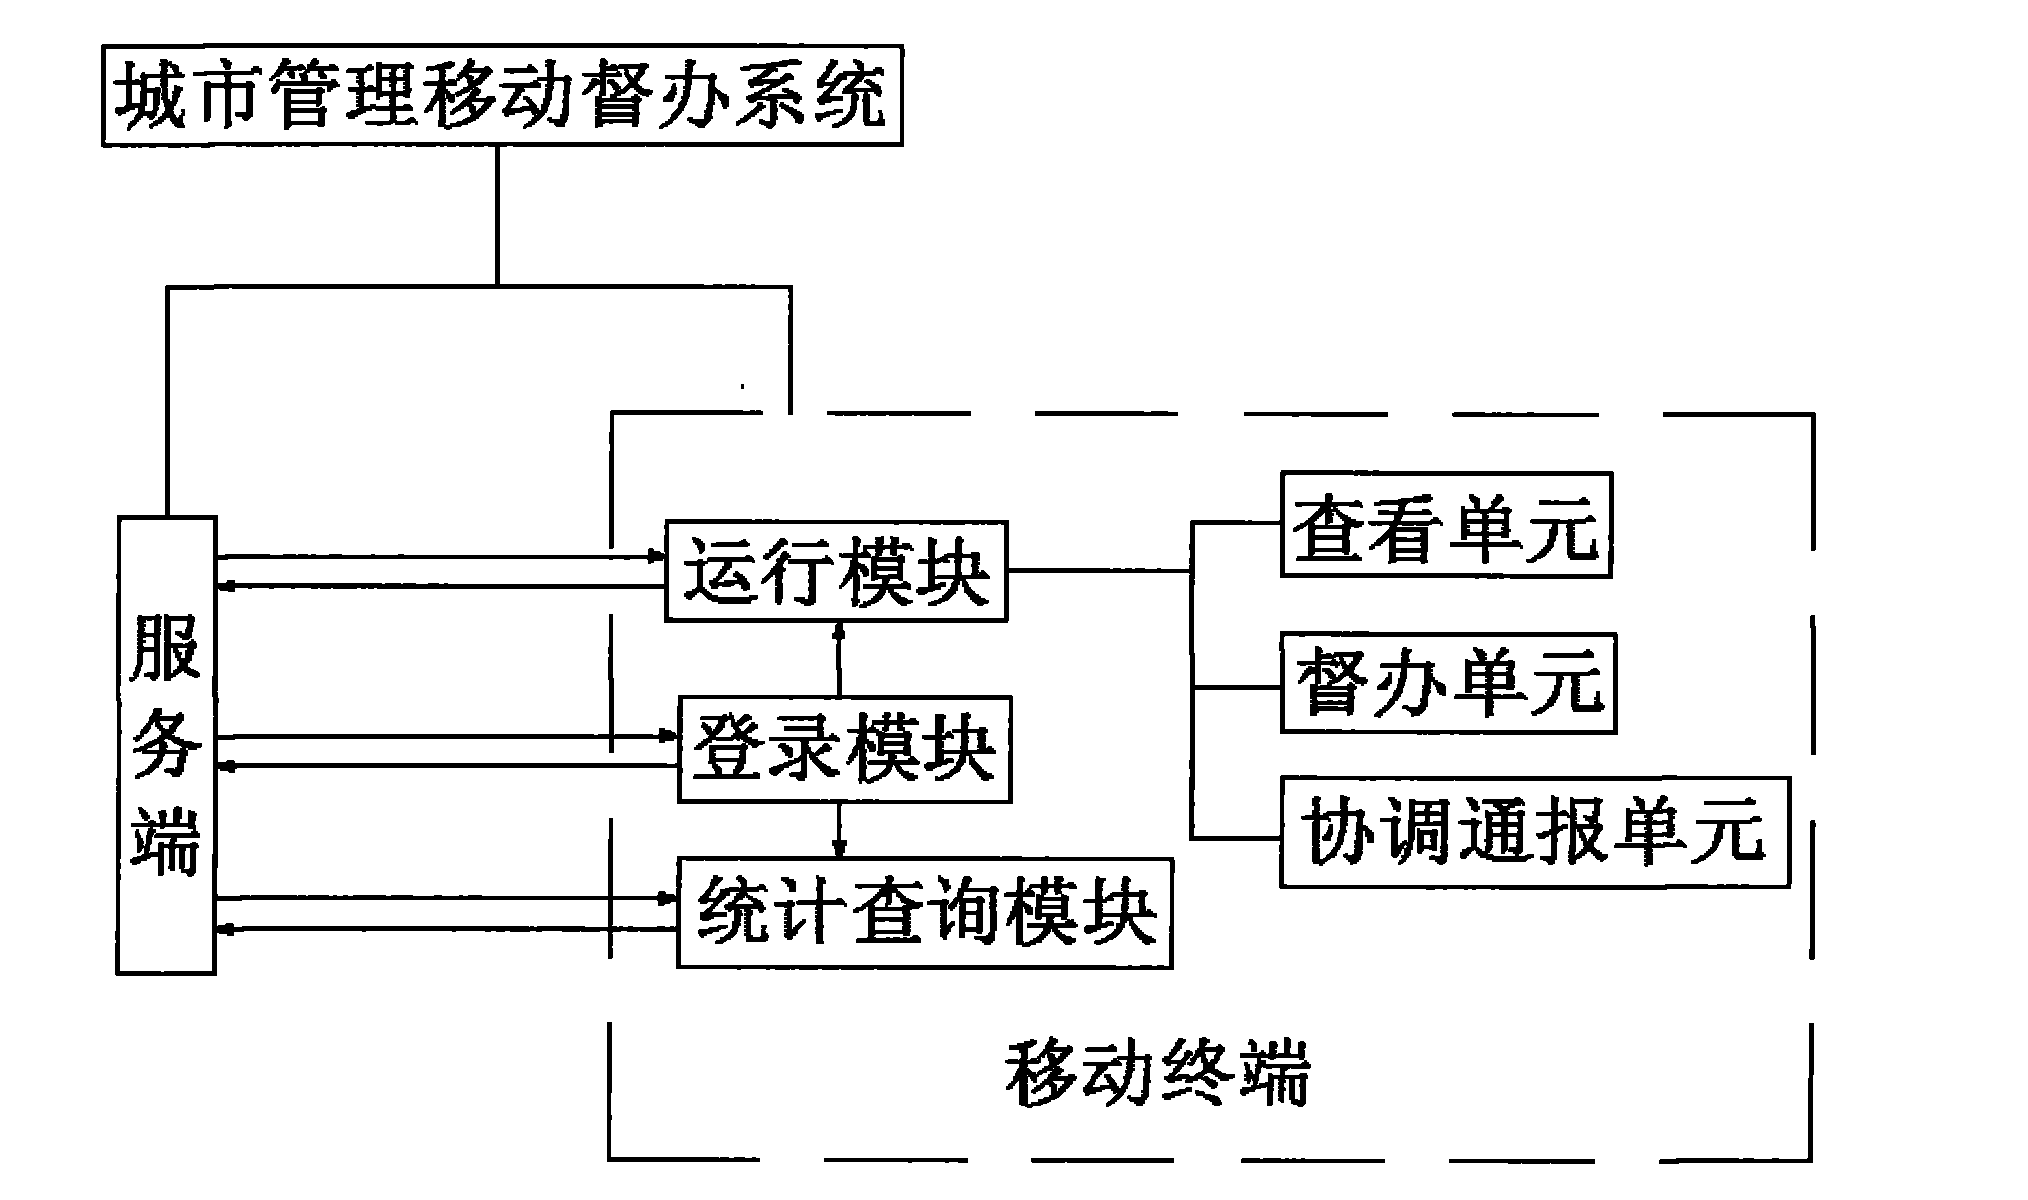 Mobile supervision and management method and system for city management